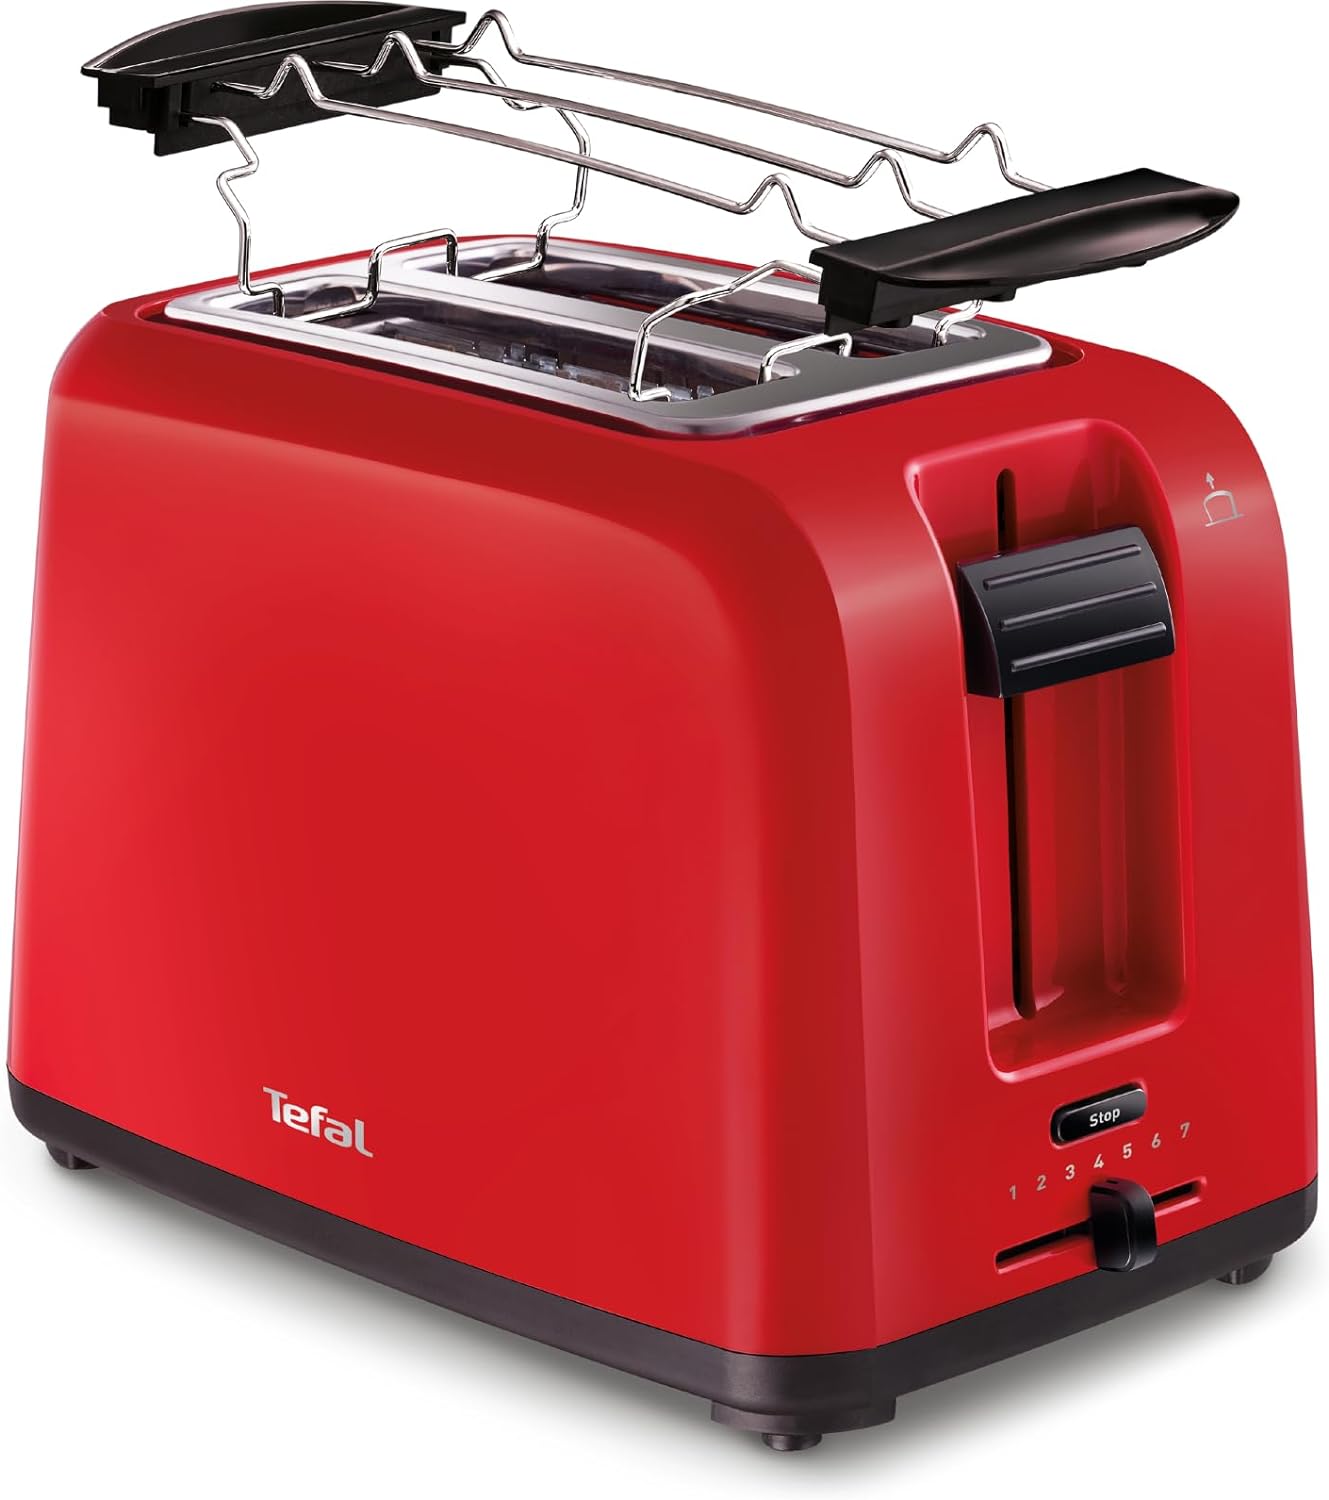 Tefal TT1A2510 Toaster | Double slot | With 7 Browning Levels | Includes Bun Attachment | Crumb Drawer | 800W | Lifting Function Button for Stop Button, Defrost and Heat | Red